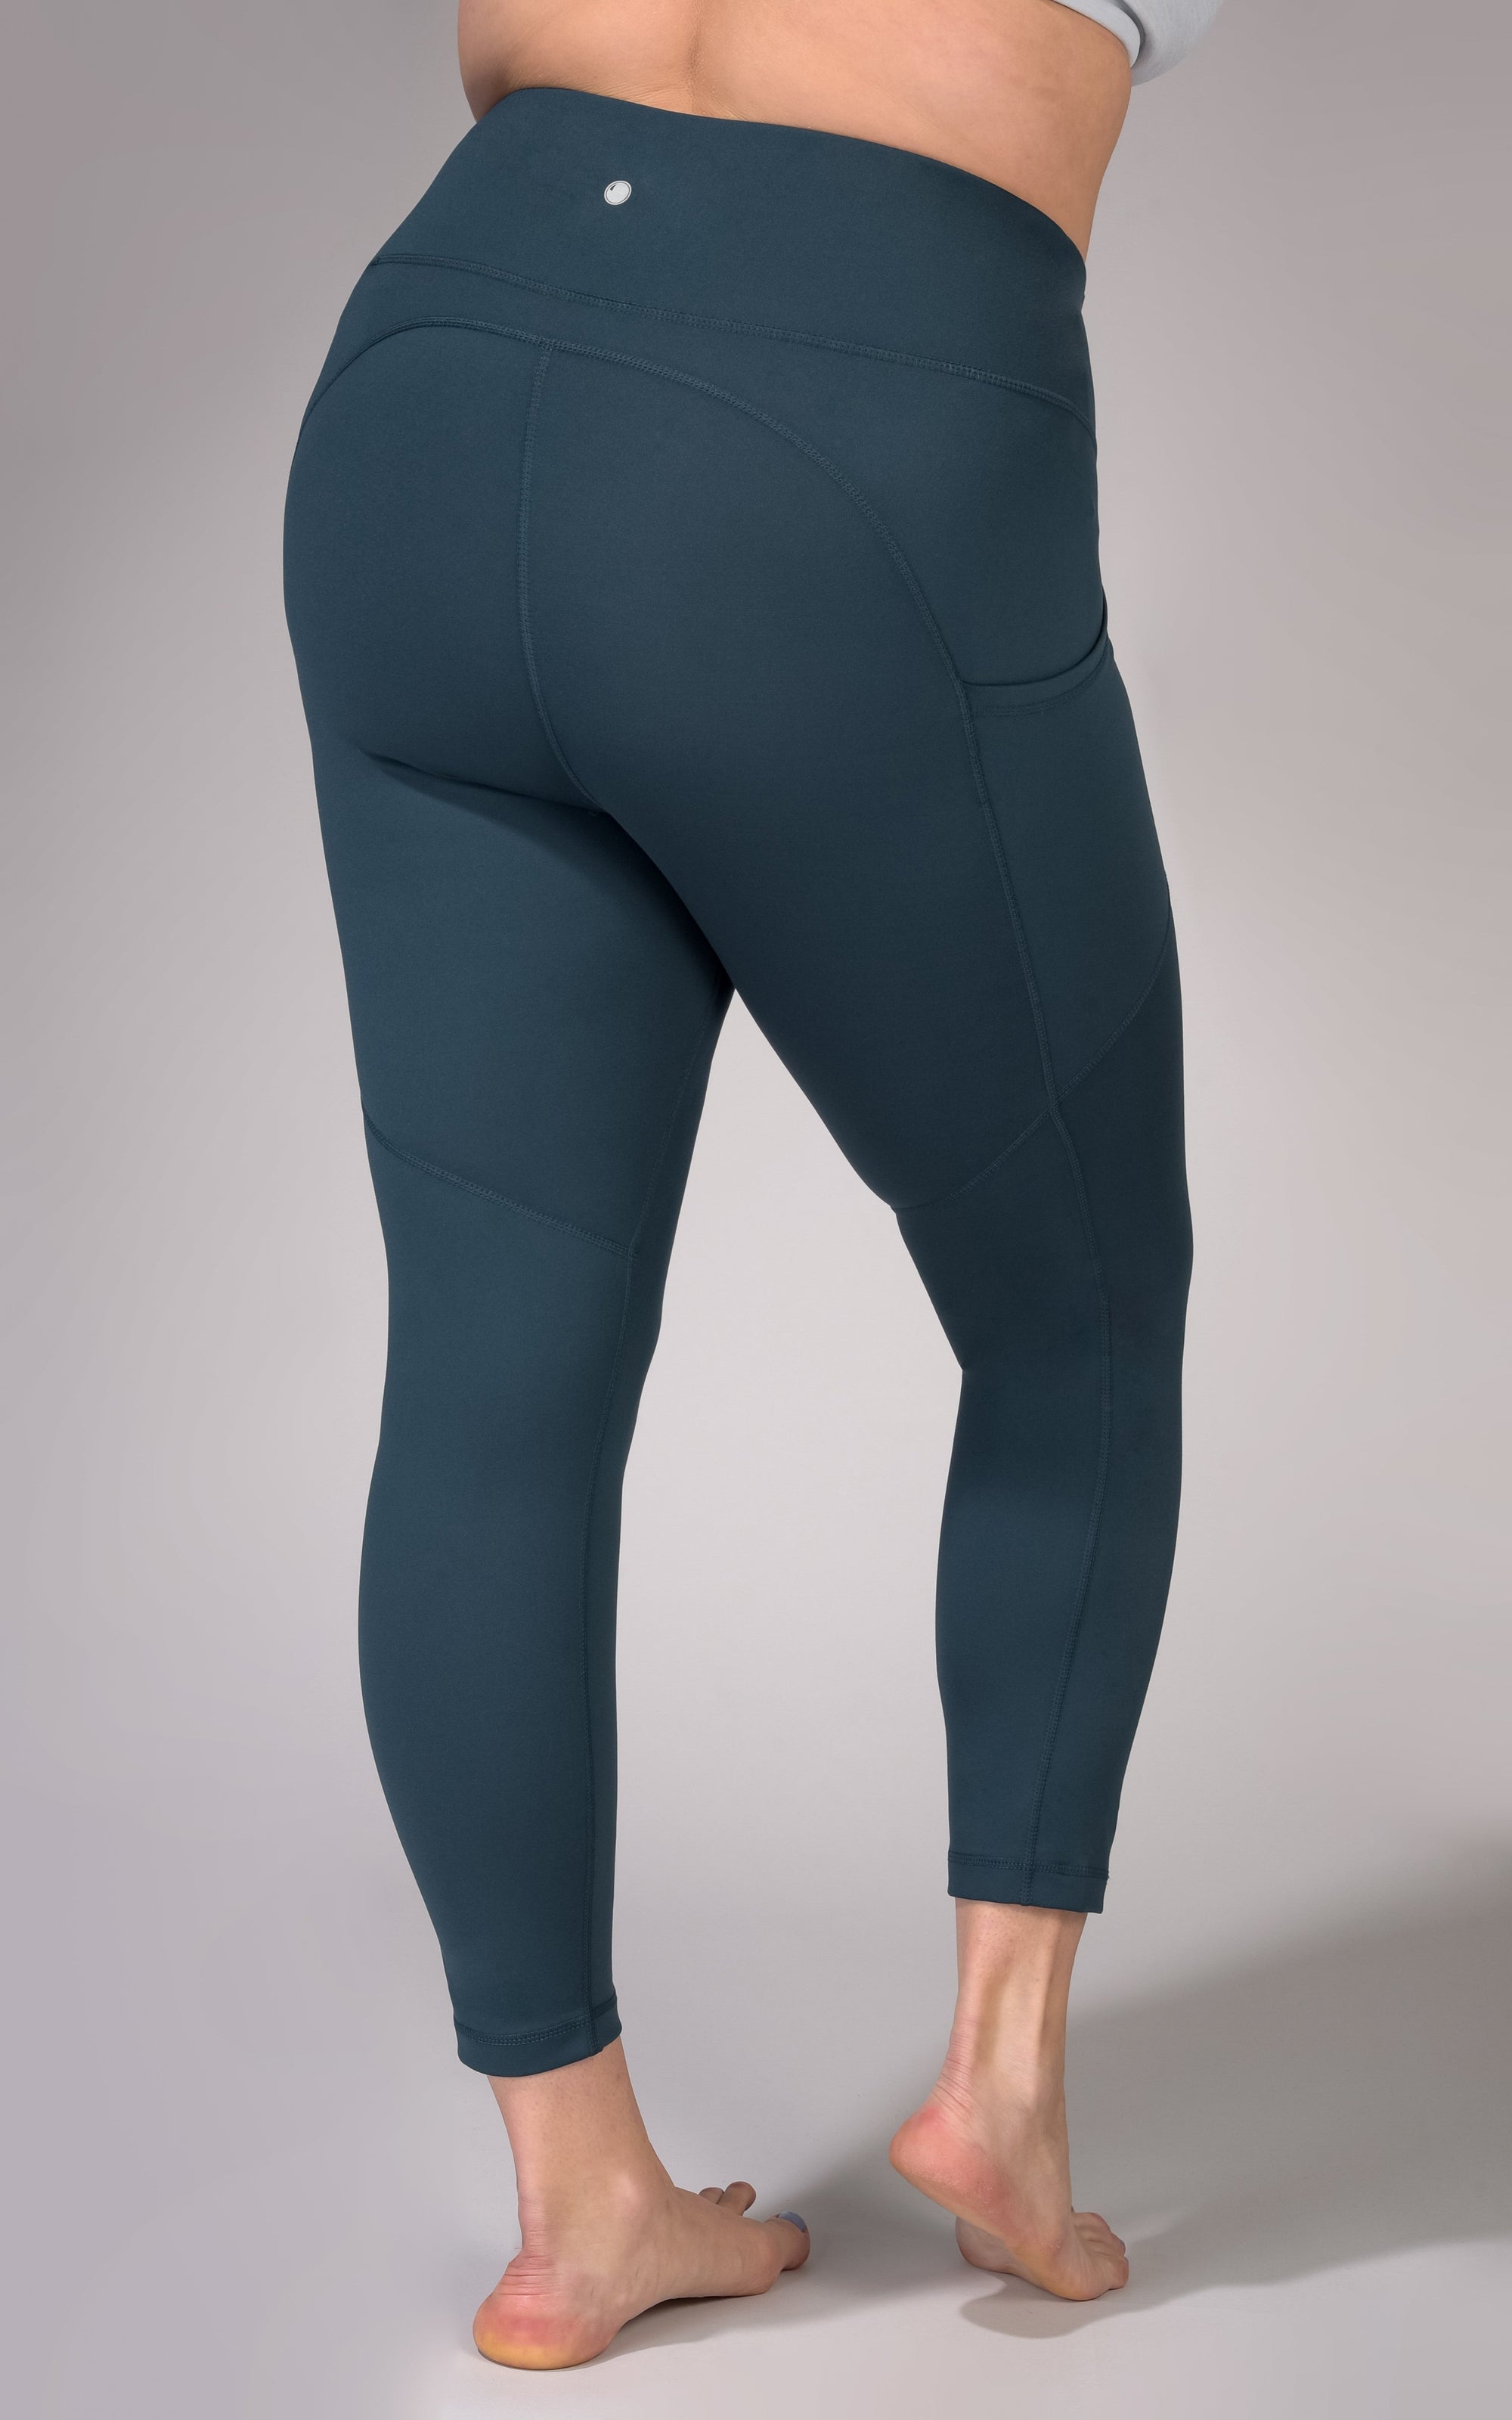 IOO11.29∋YOGALICIOUS LUX 12 Colors Compression Full-Length High